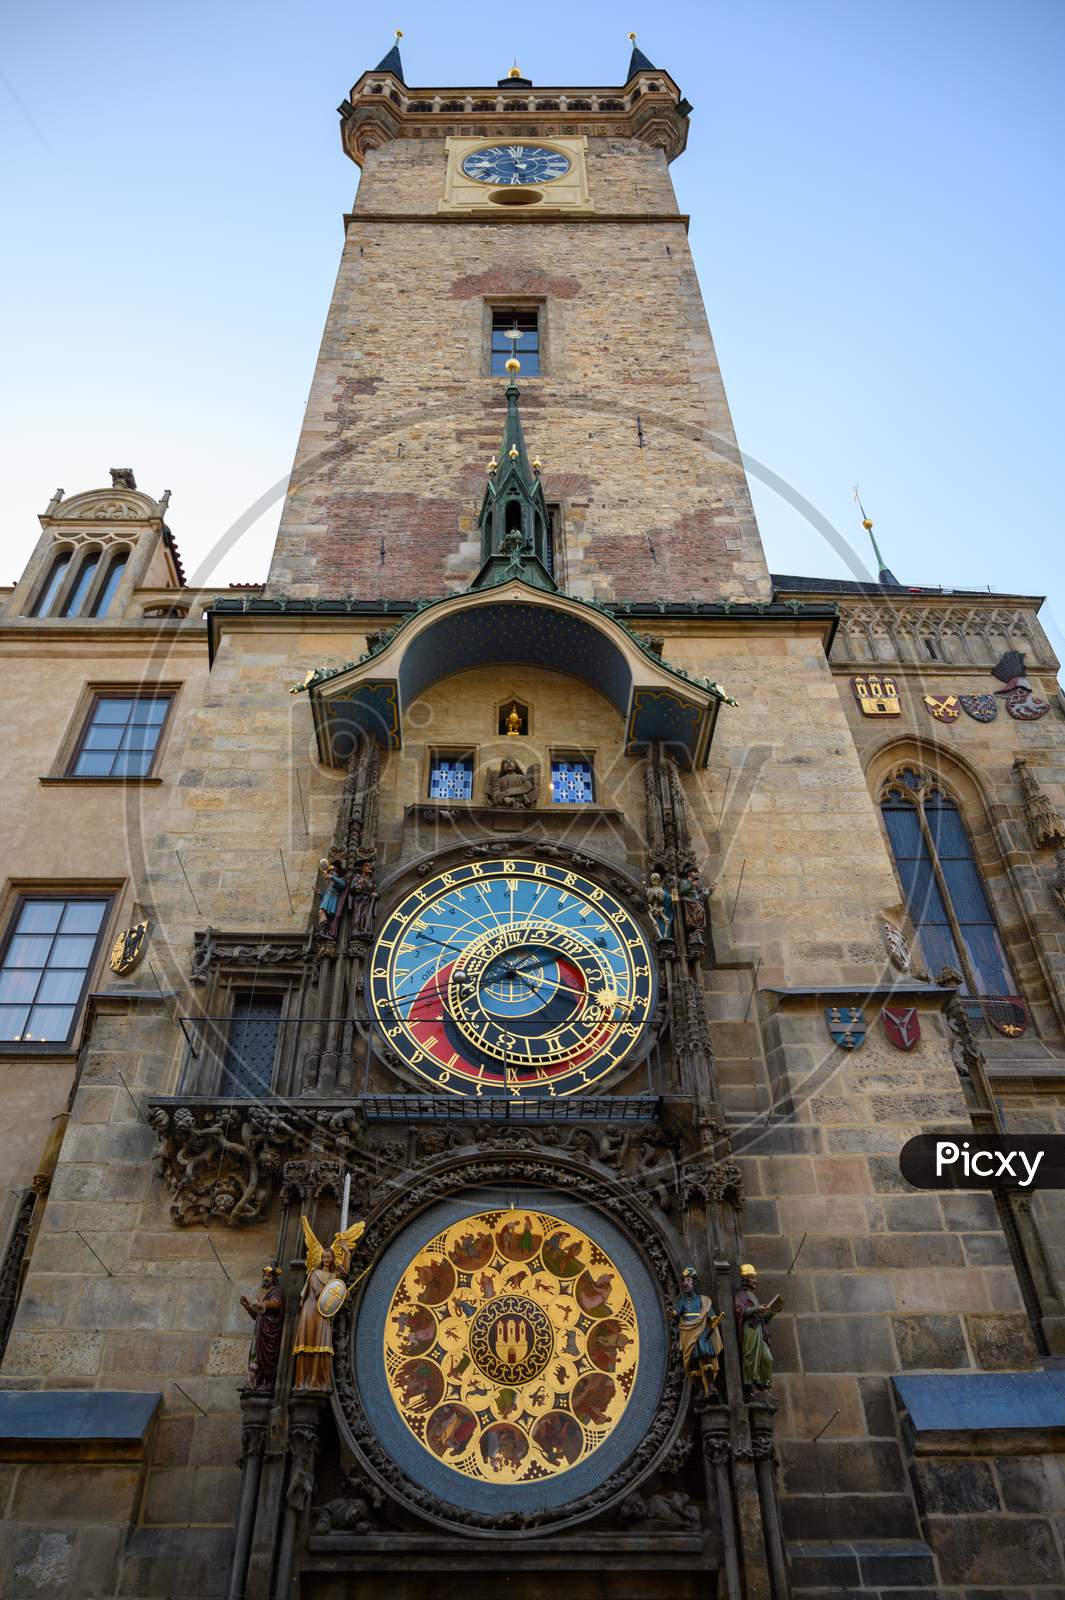 The Prague Astronomical Clock On The Side Of The Old Town Hall, Prague, Czech Republic